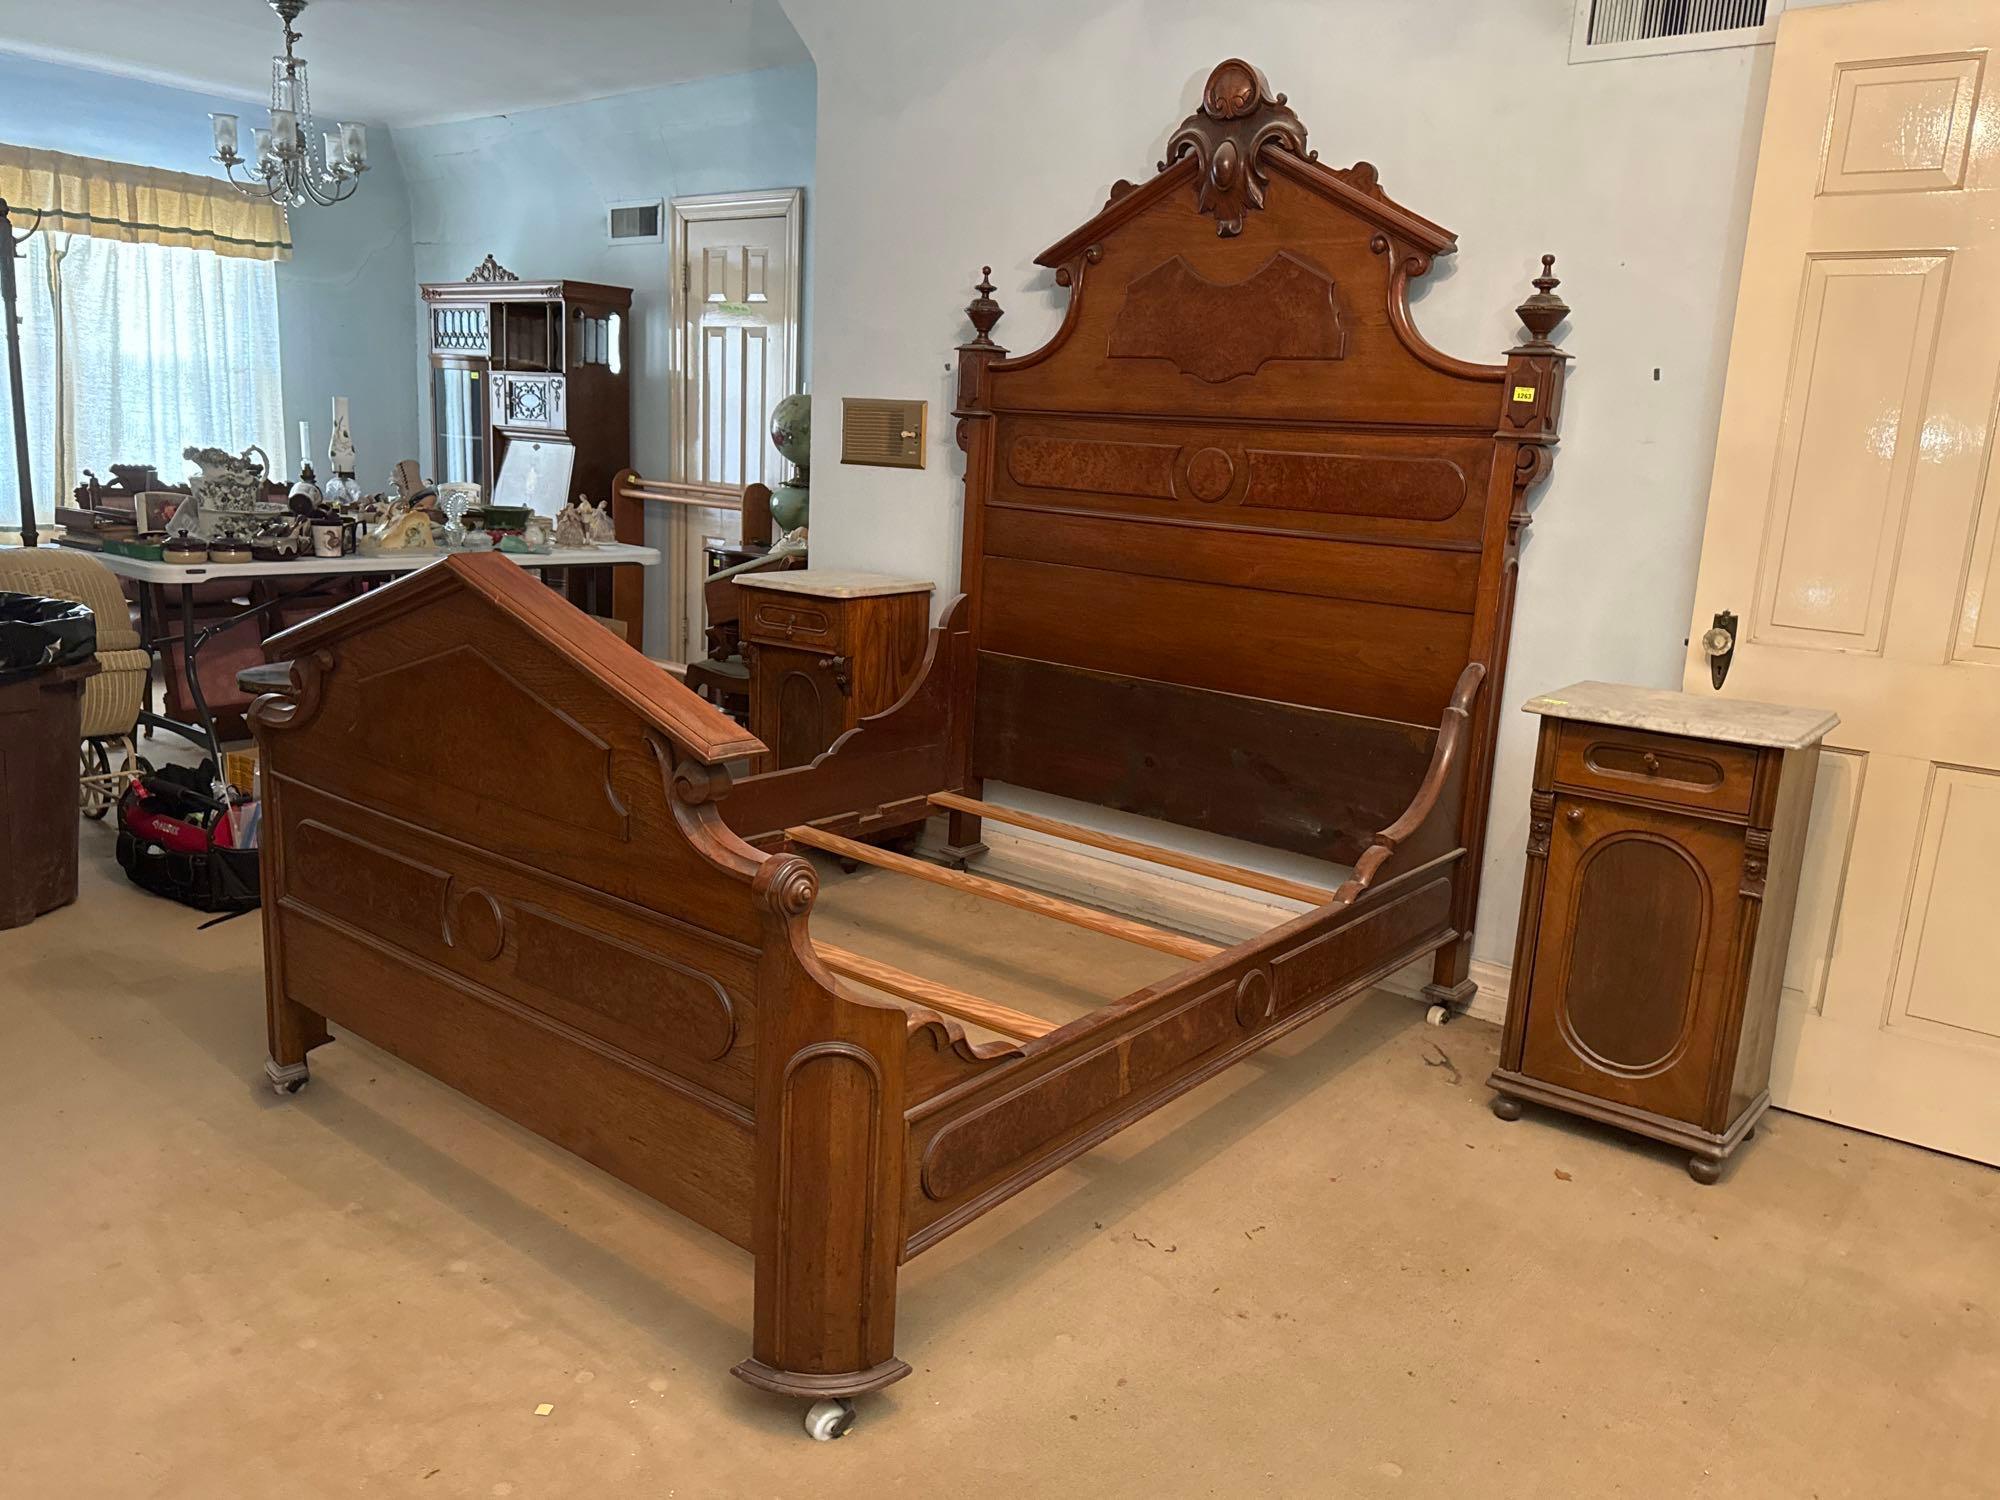 Antique Wood Carved Full Size Bed